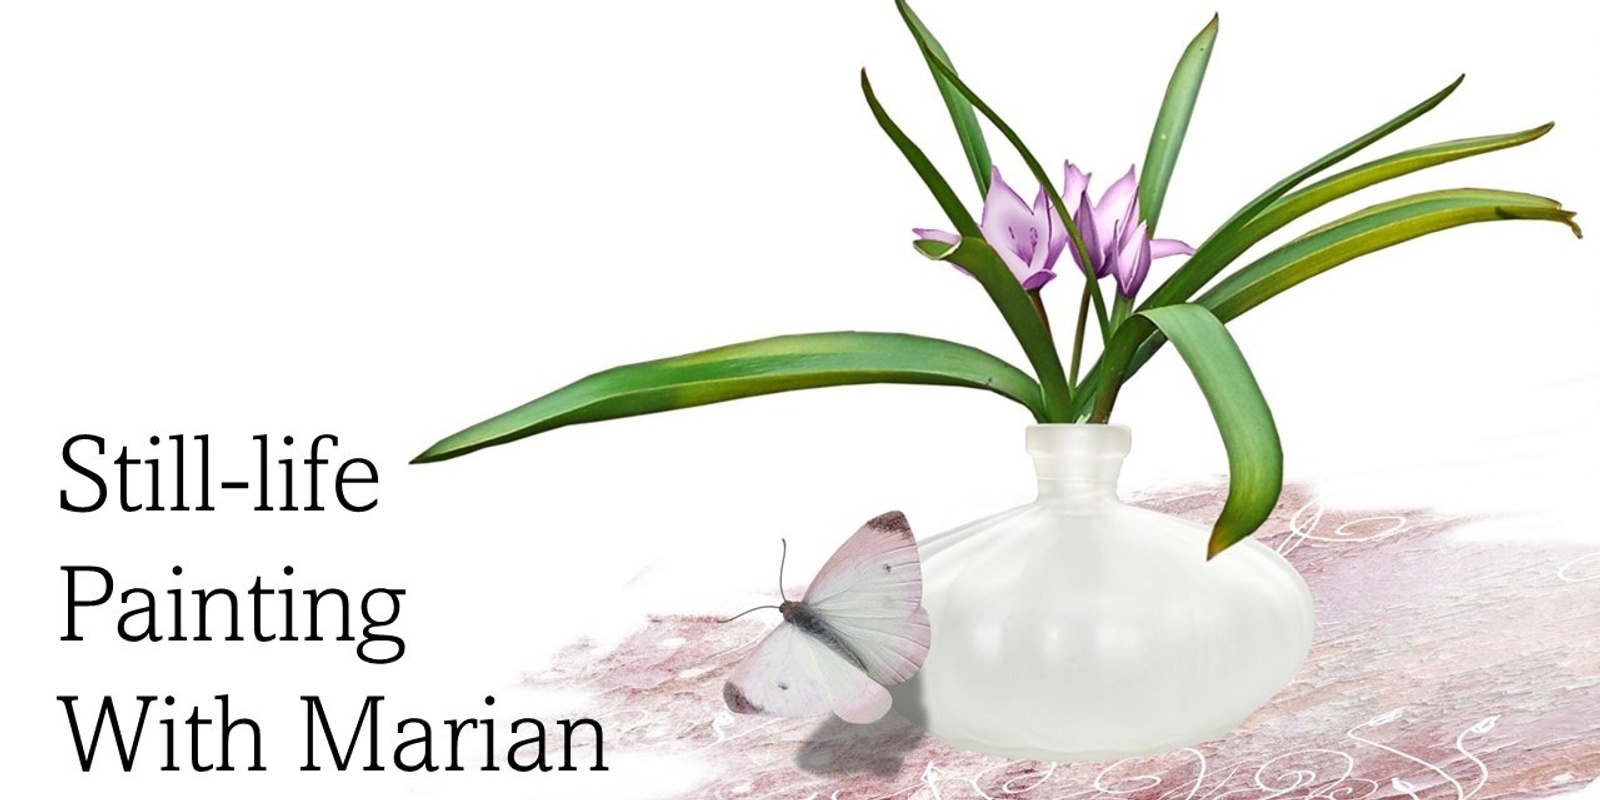 Banner image for Still-life painting with Marian